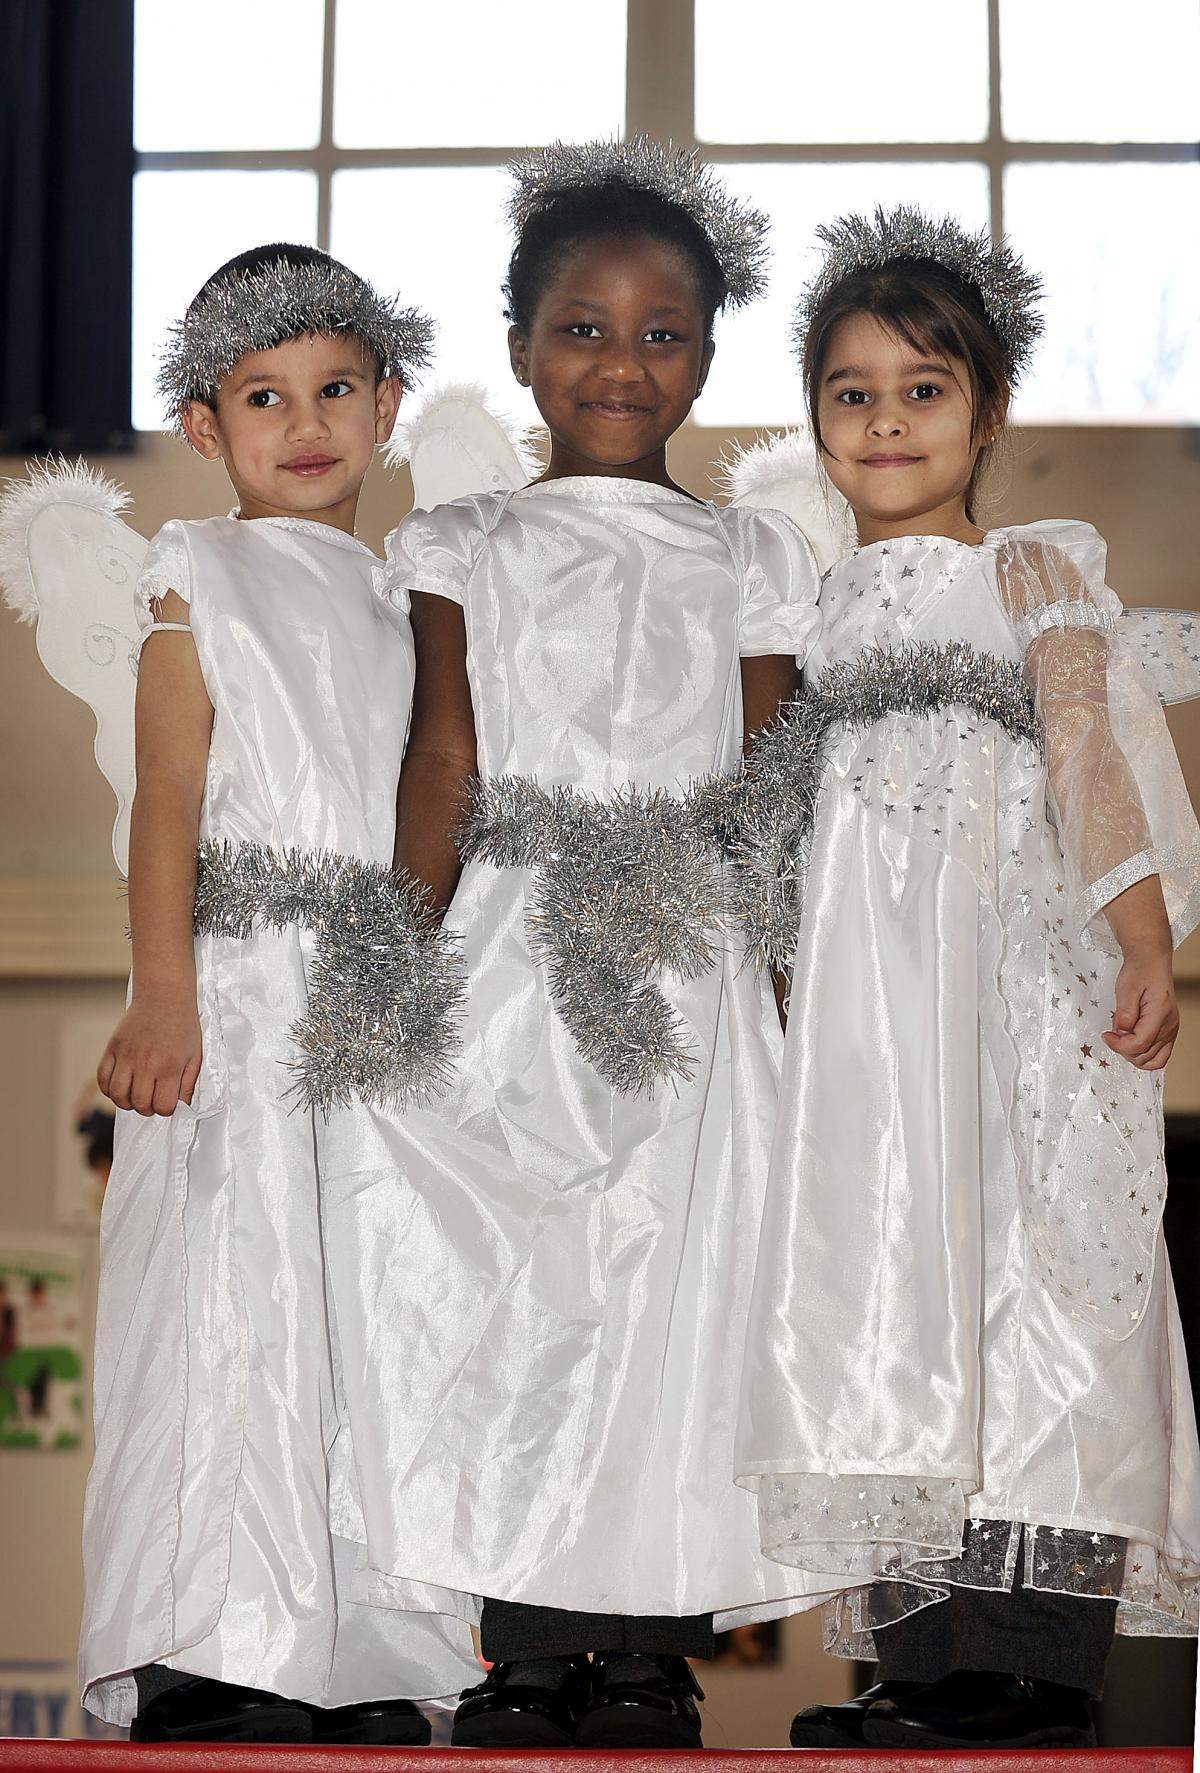 Taking part in Horton Grange Primary School Nativity were, from the left, Awais Mustafa, Francine Bongo and Seher Imran